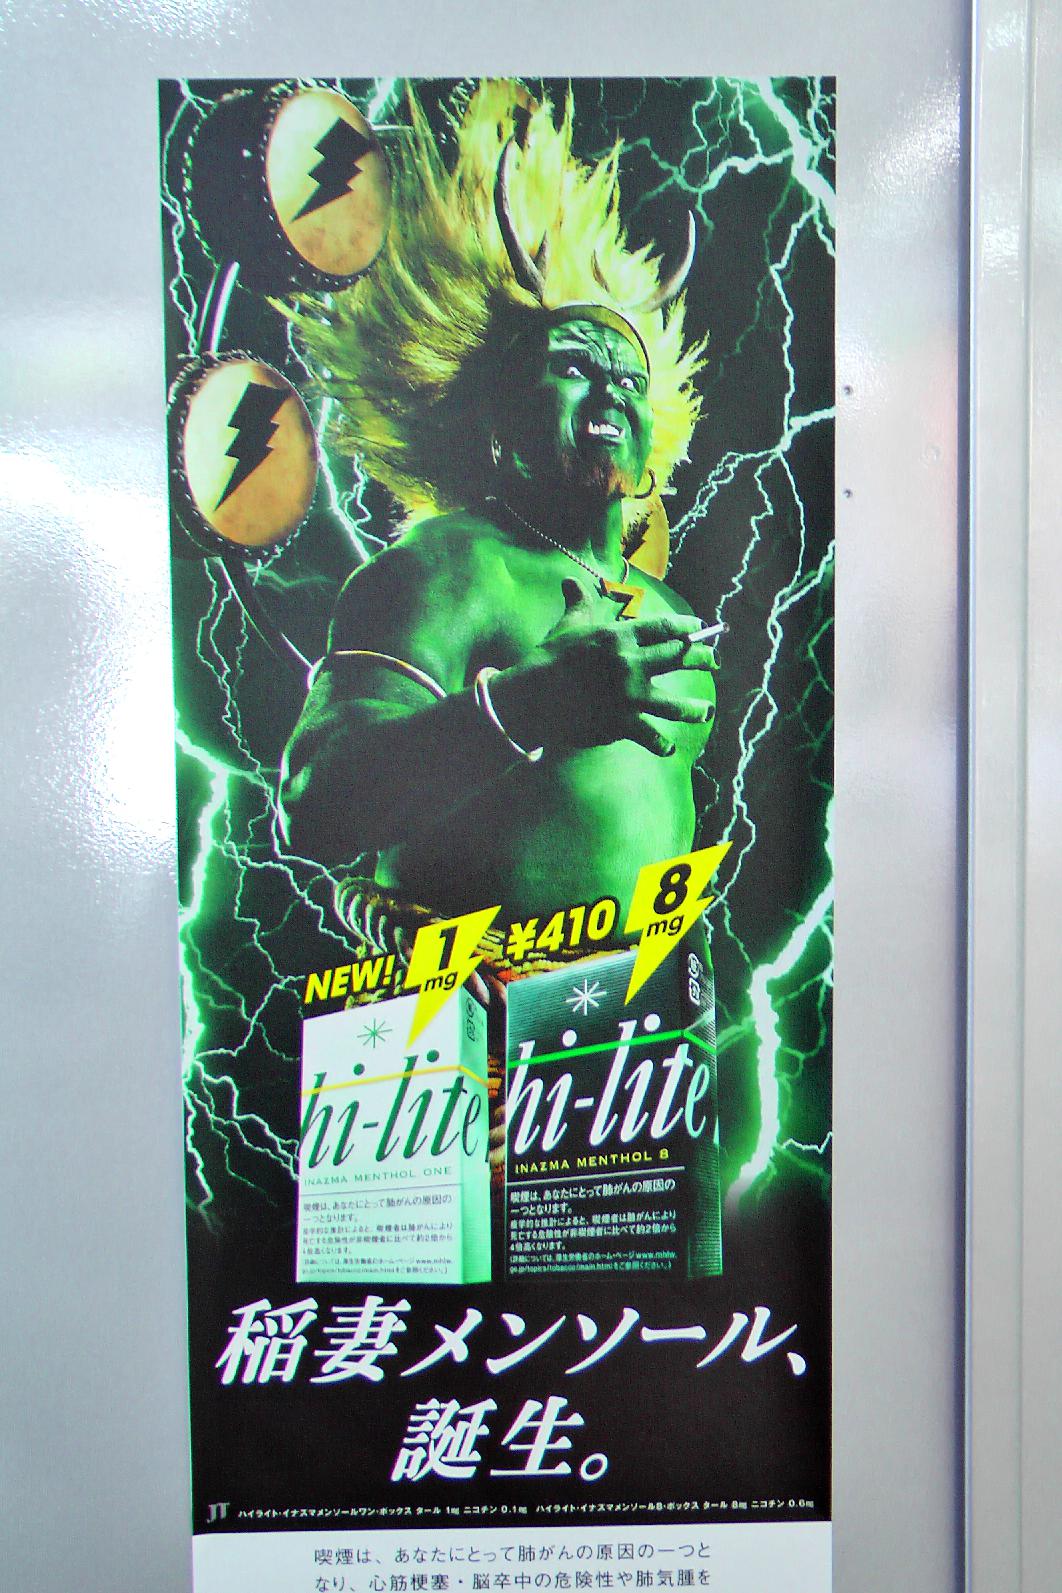 Blanka from Capcom's Street fighter is promoting cigarettes now.